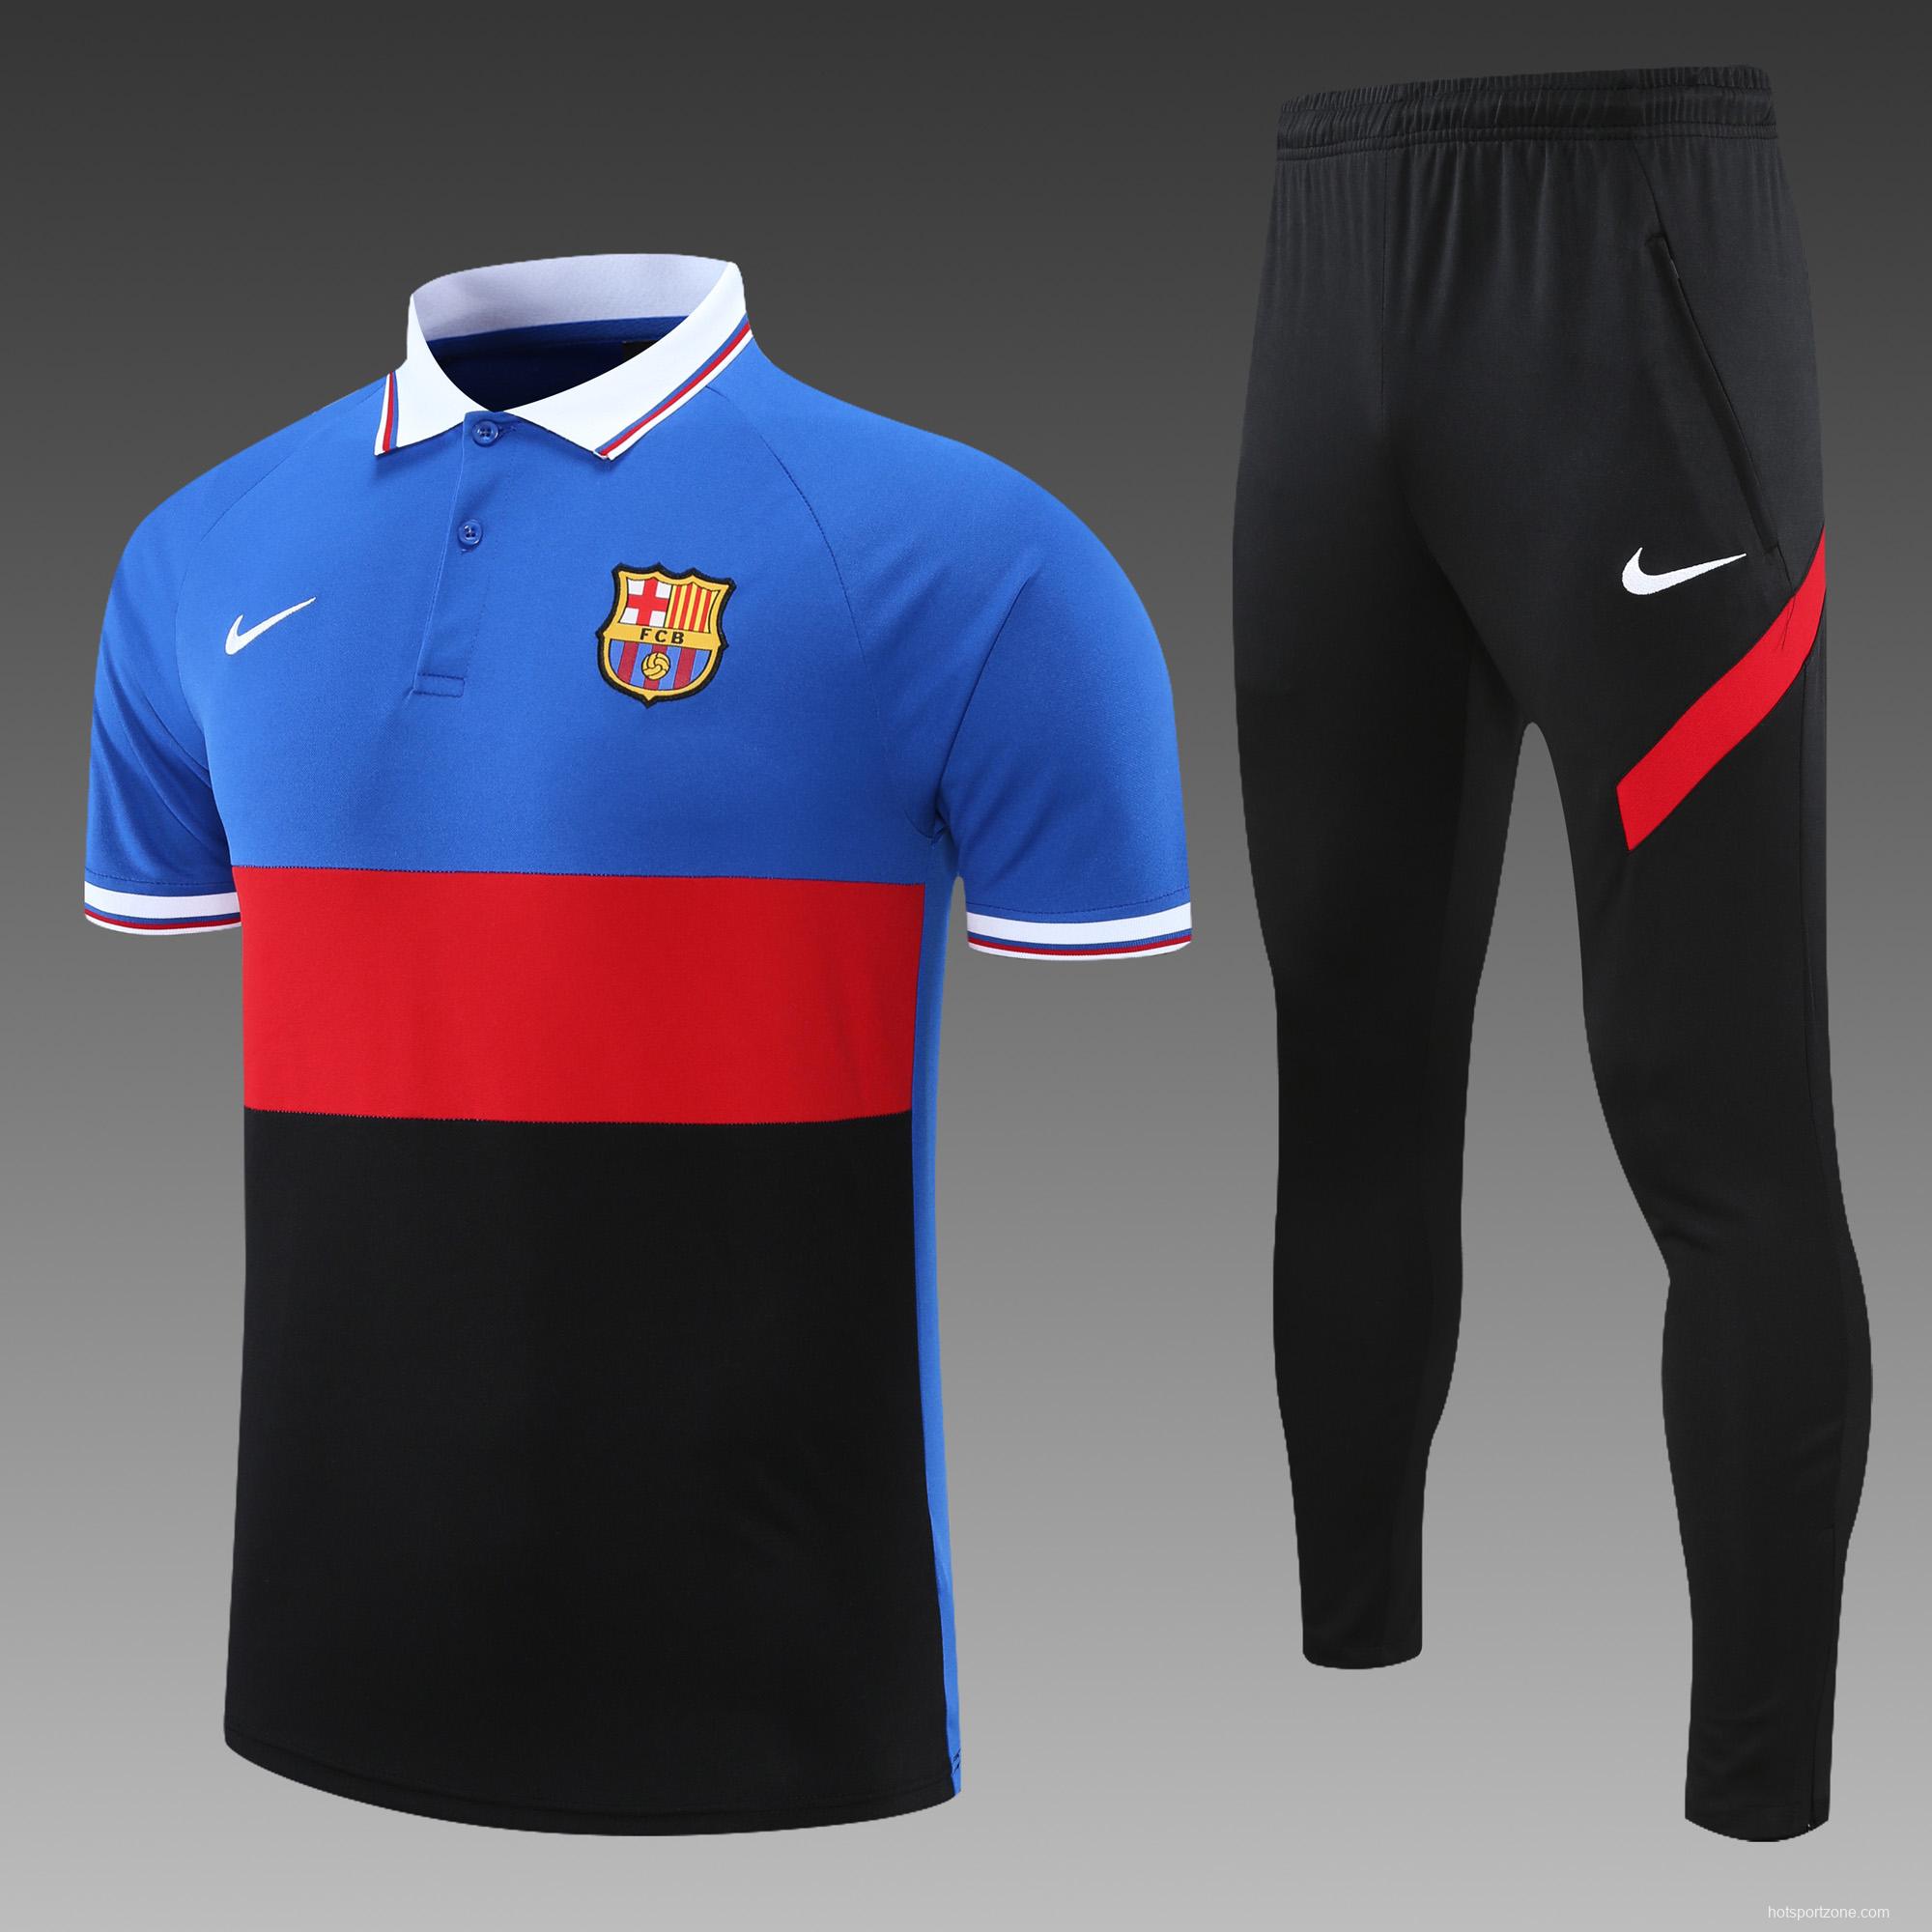 Barcelona POLO kit blue, red and black (not supported to be sold separately)